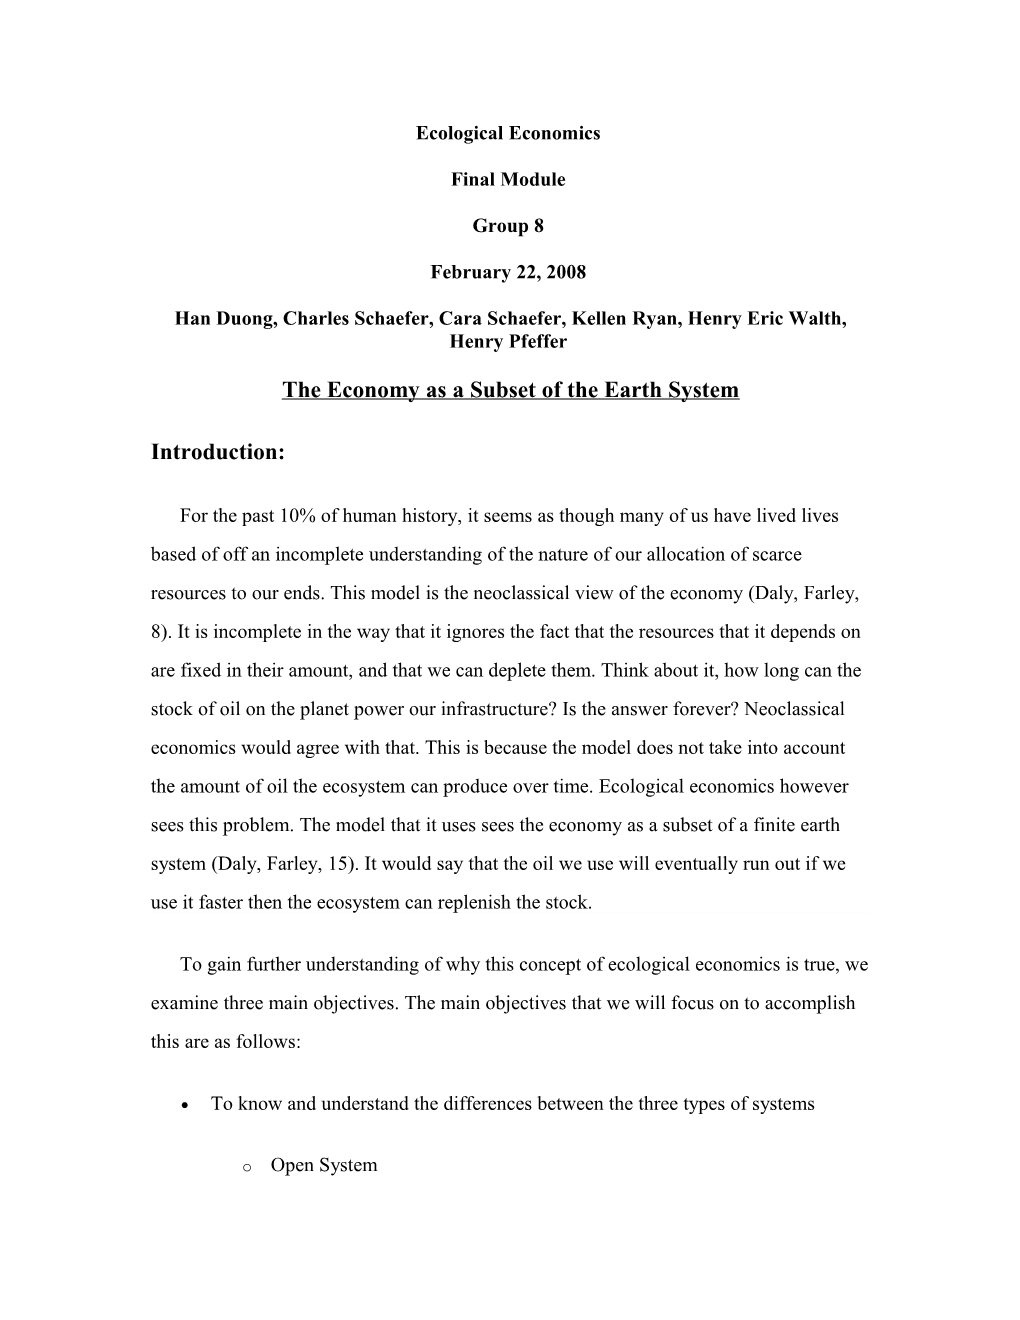 The Economy As a Subset of the Earth System